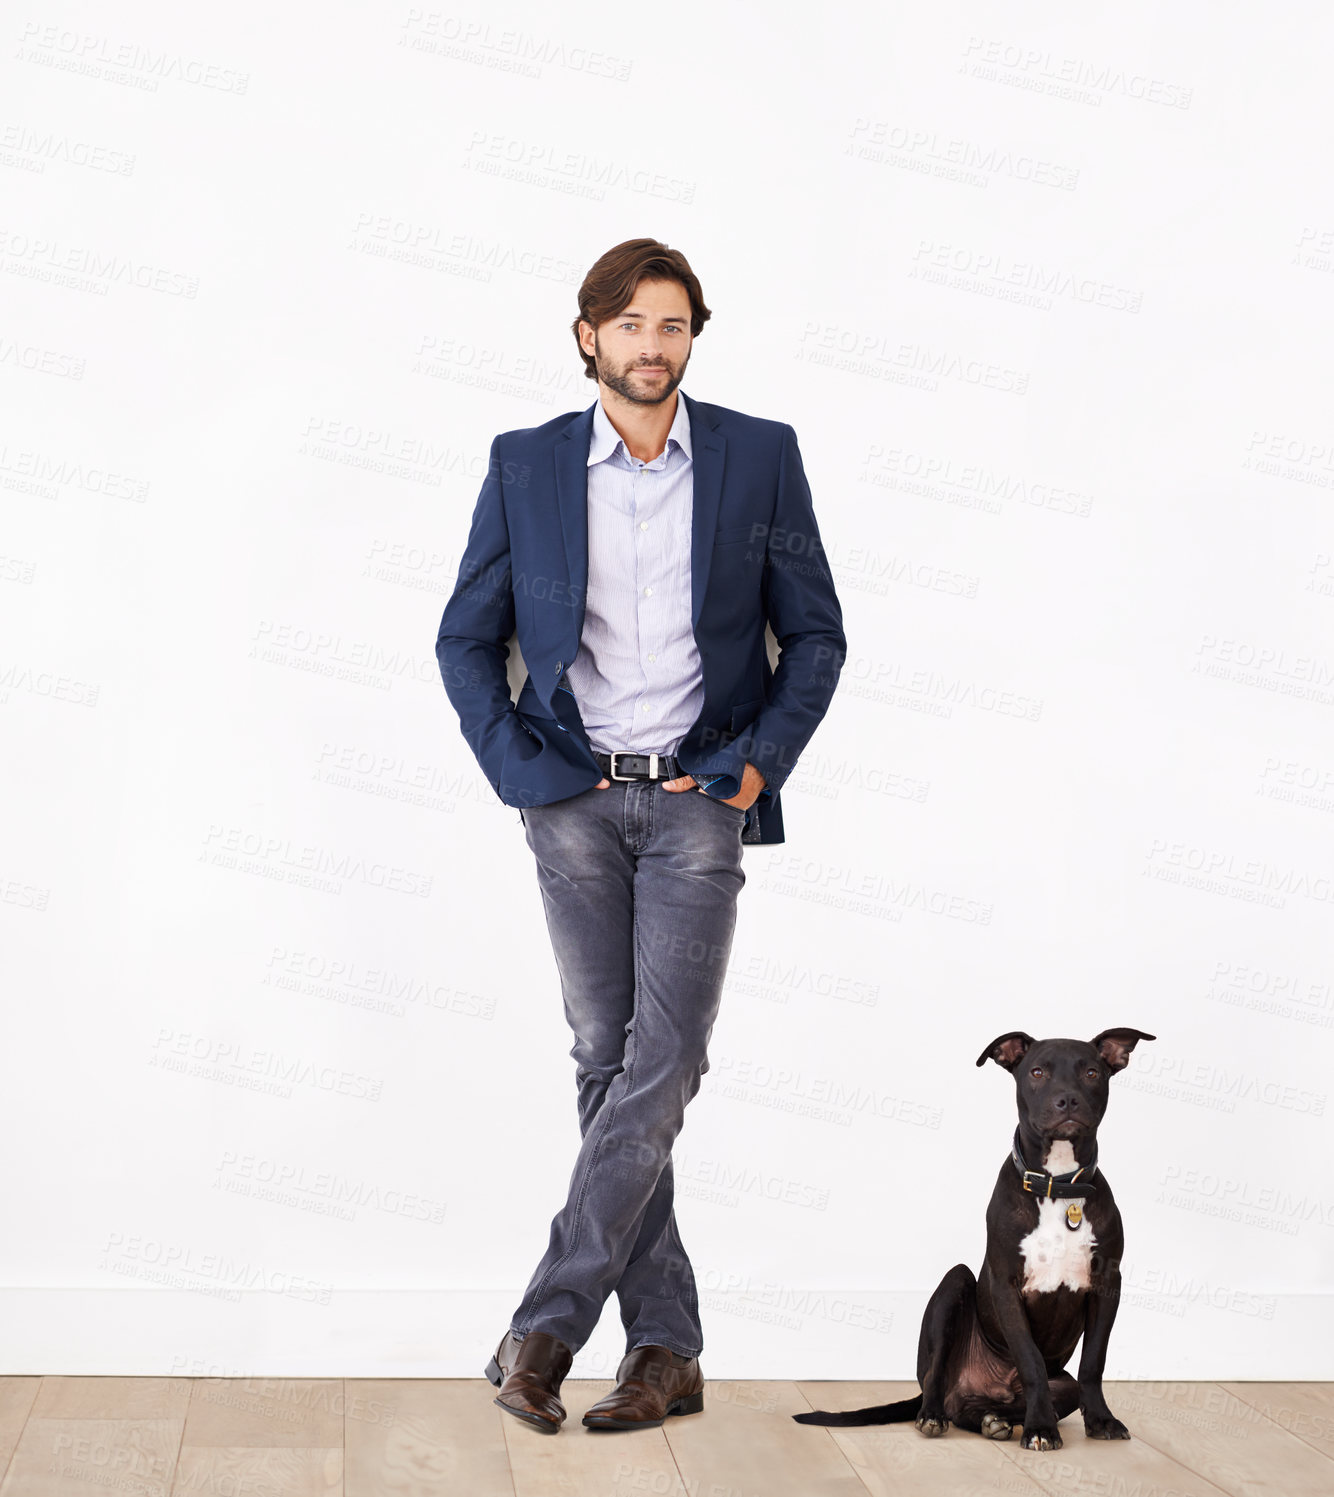 Buy stock photo A handsome man standing next to his dog - portrait